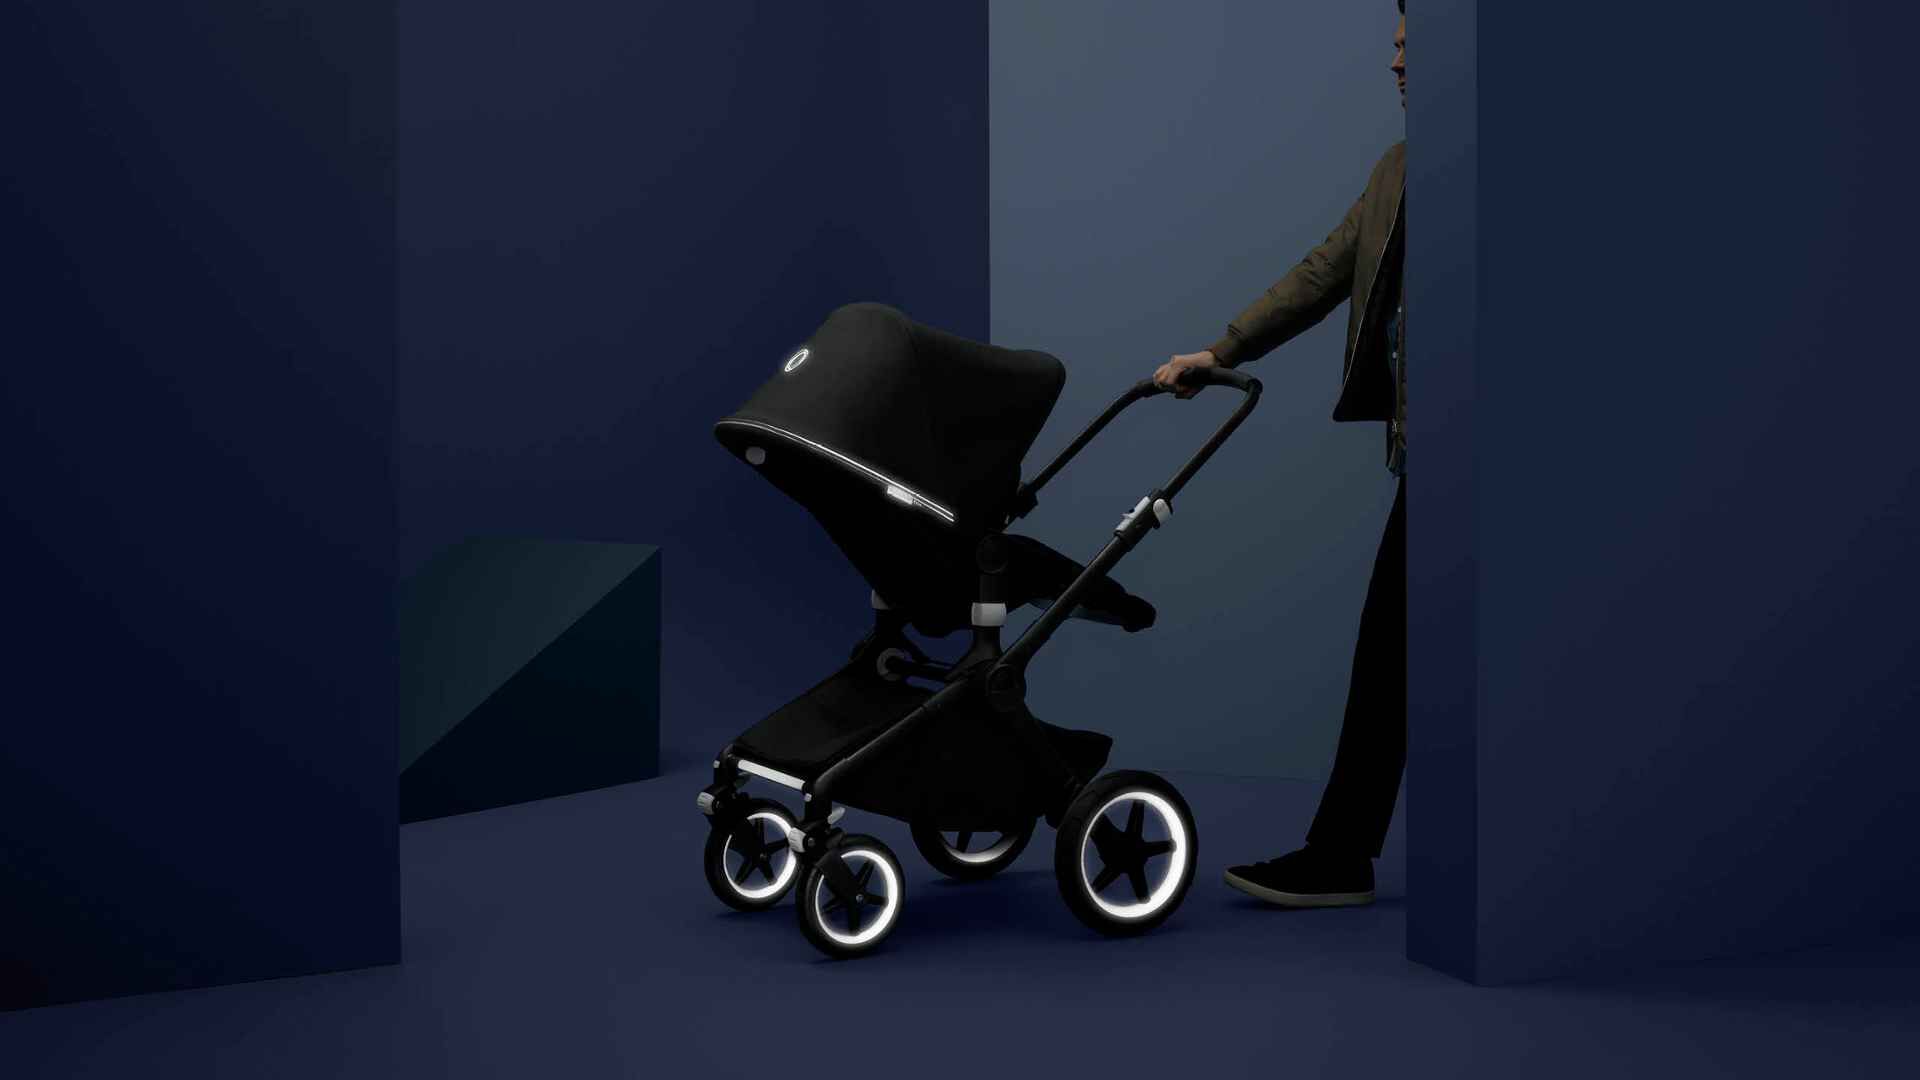 cybex compatible stroller